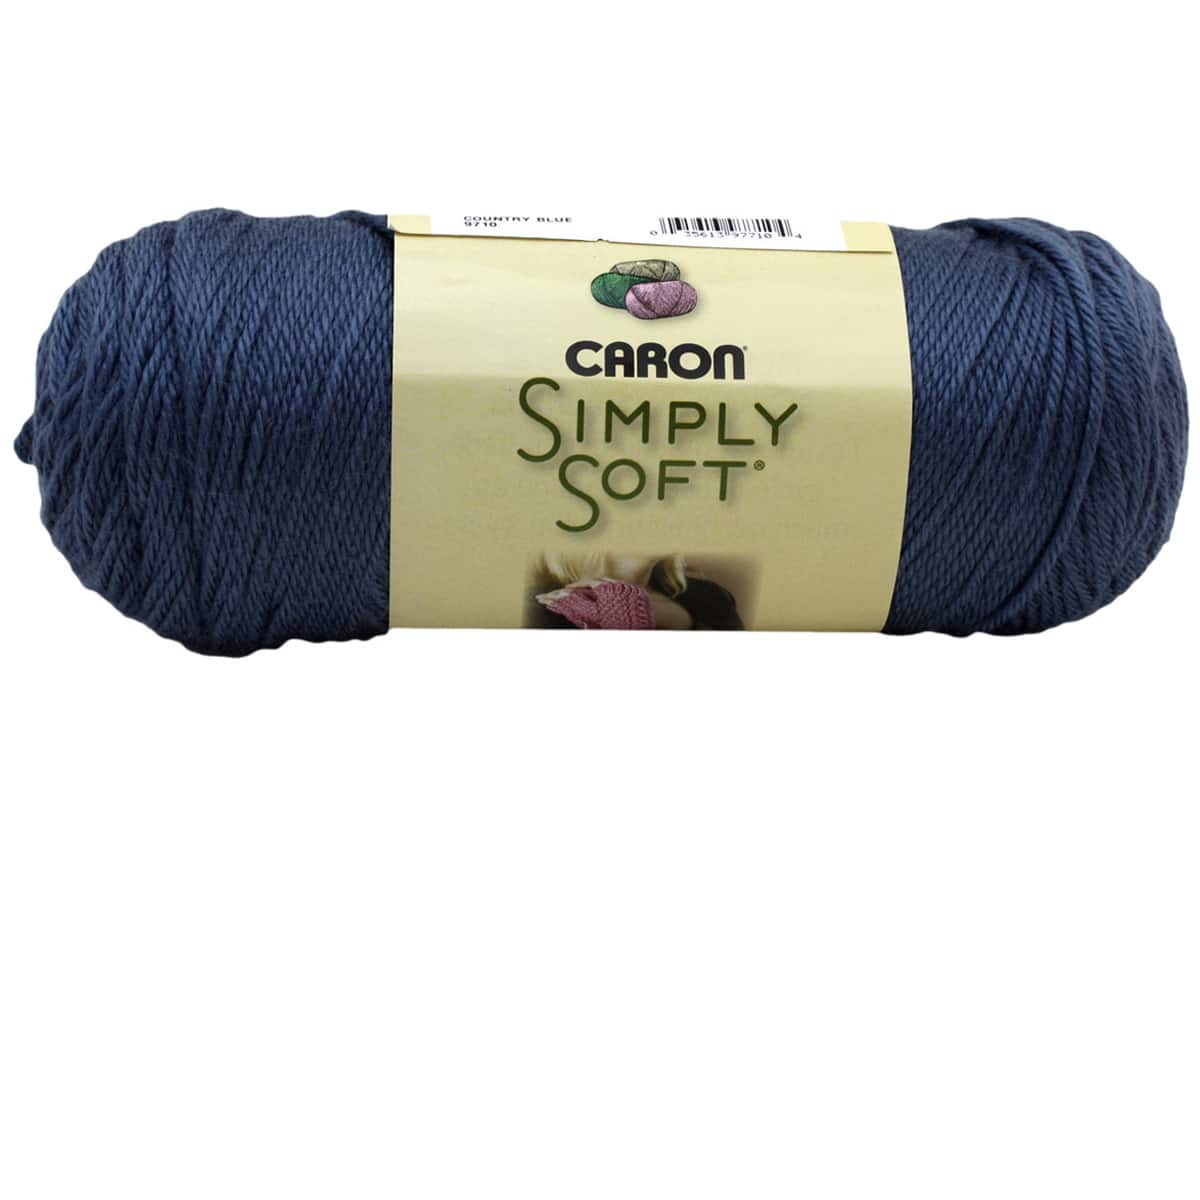 Caron Simply Soft Speckle Yarn-Blue Gingham, 1 count - City Market